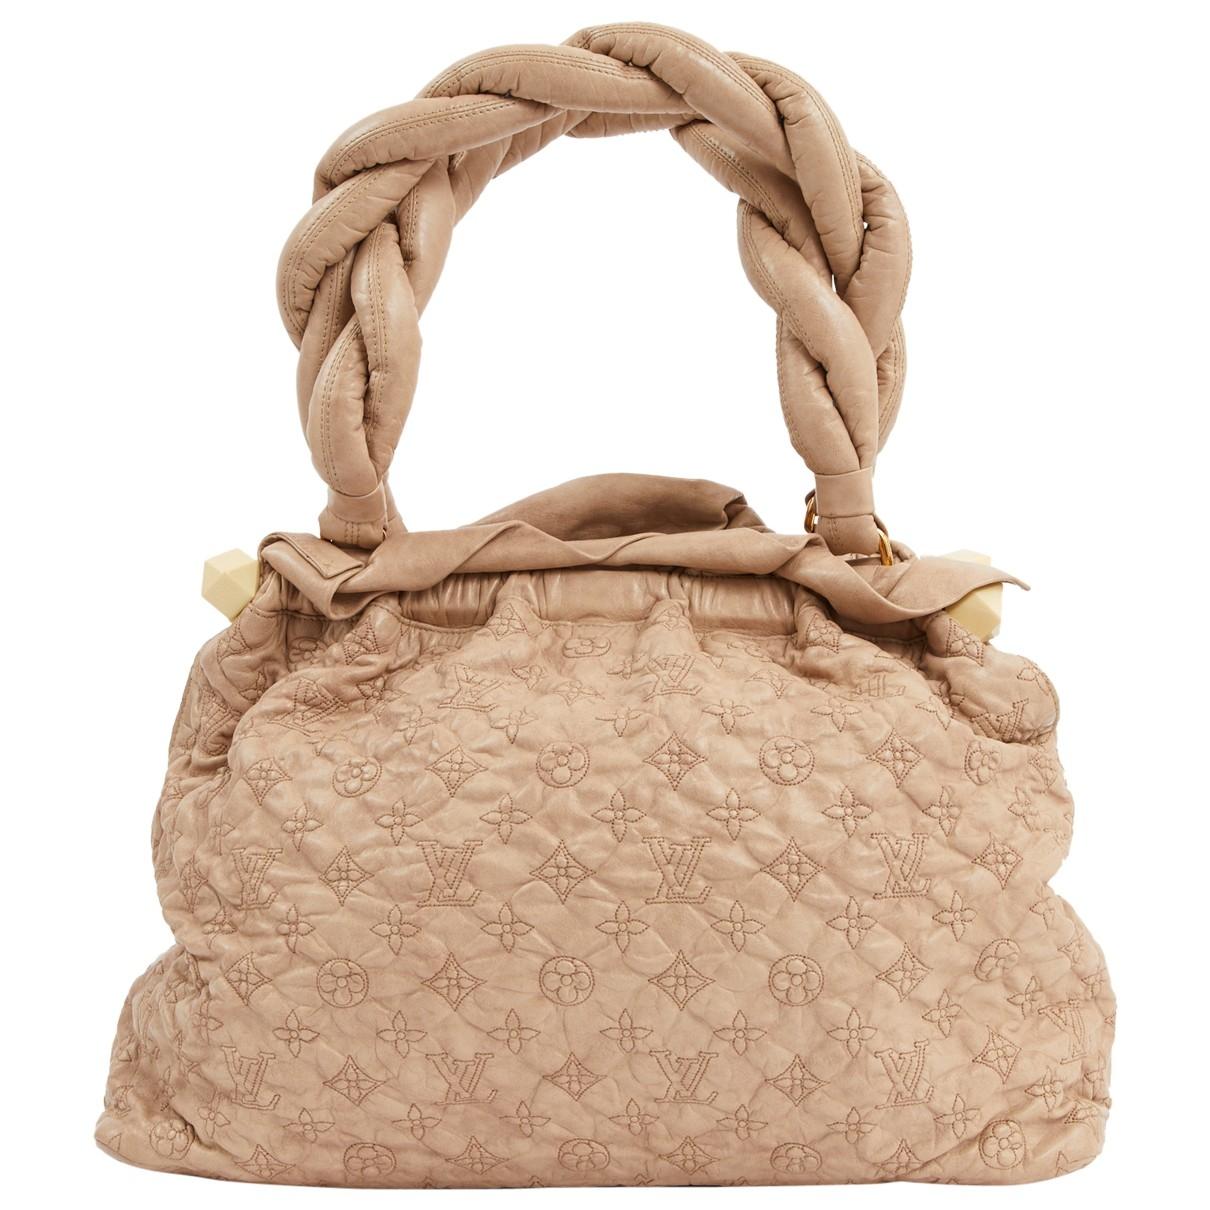 Lyst - Louis Vuitton Olympe Leather Bag in Natural